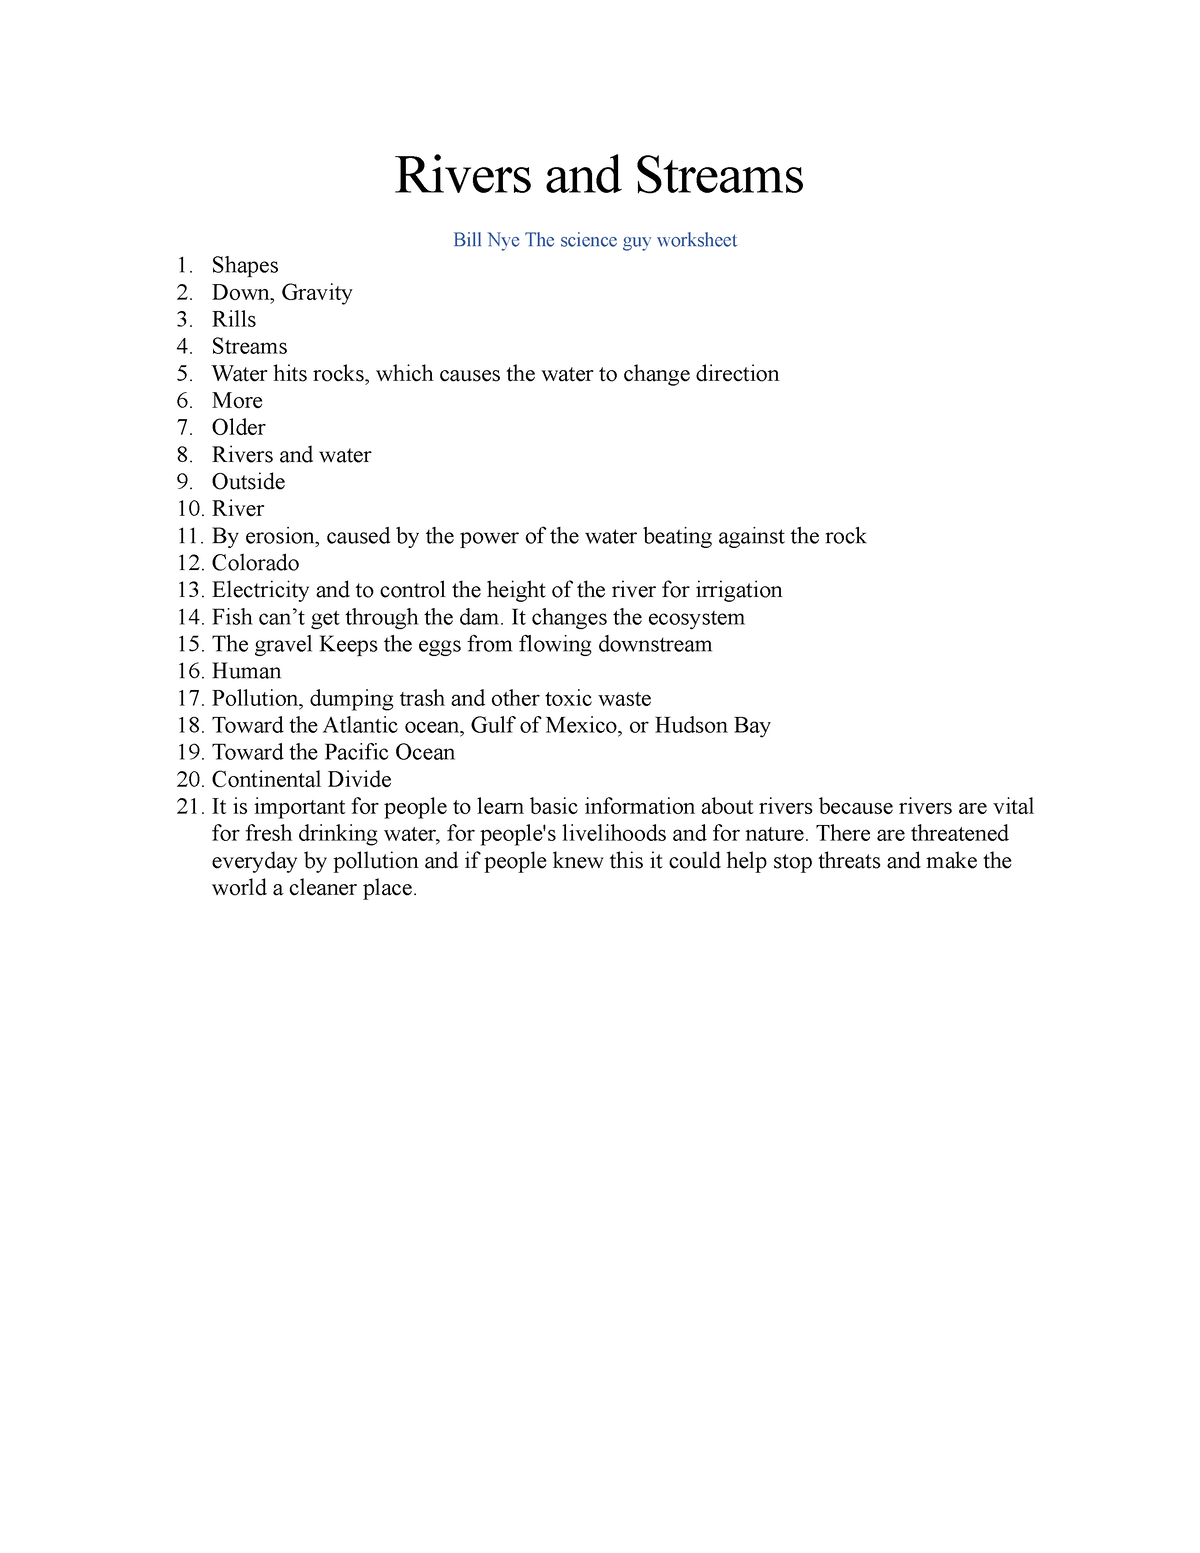 Rivers and Streams - The bill nye the science guy river and stream For Bill Nye Erosion Worksheet